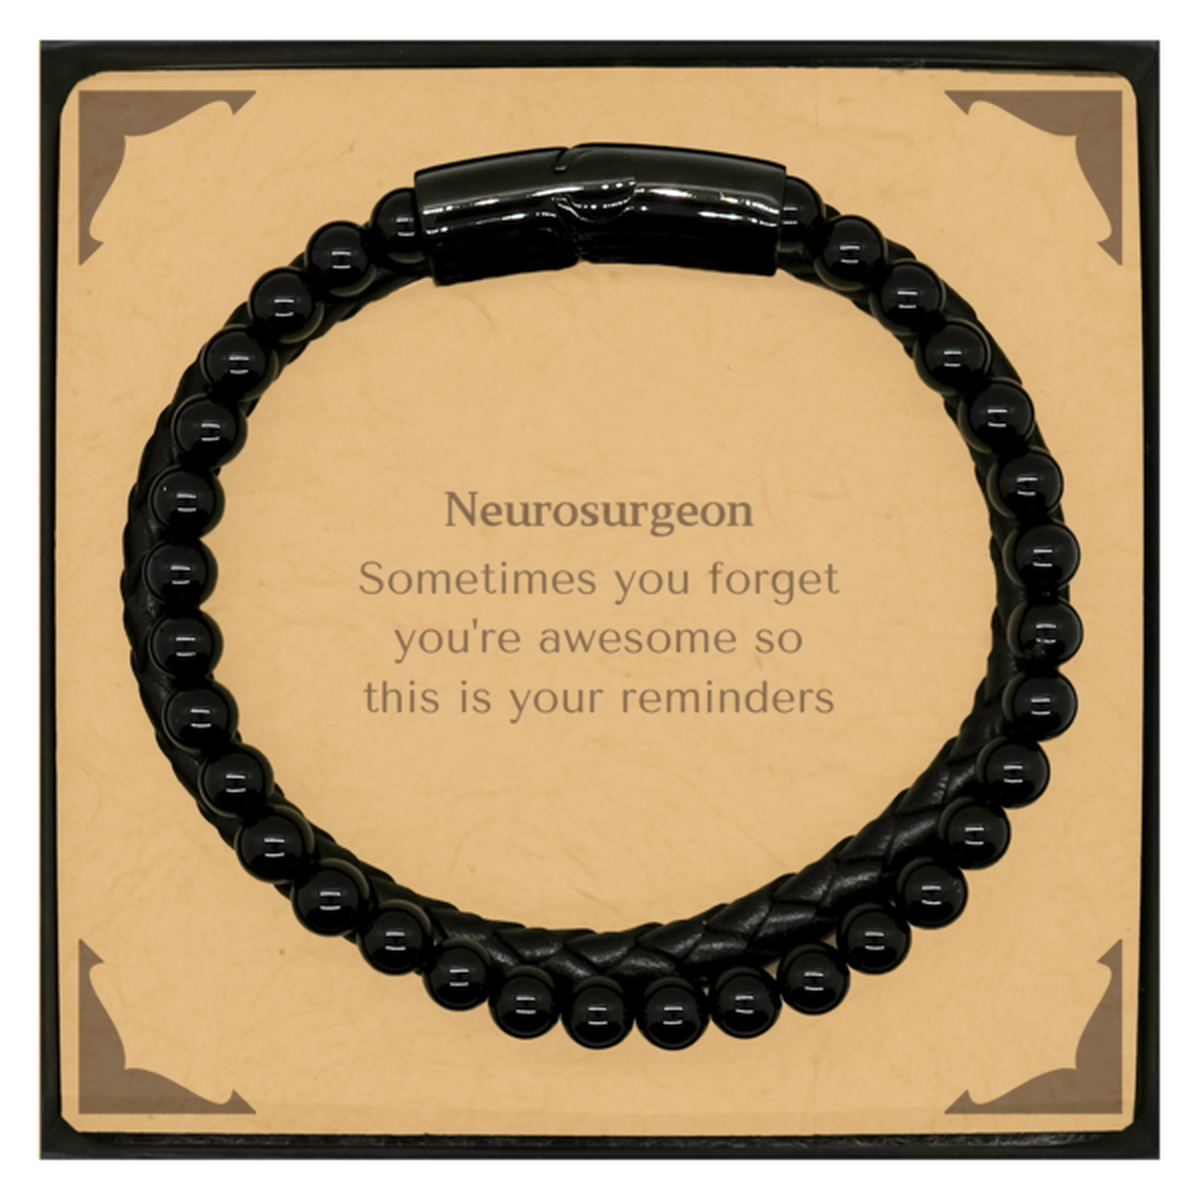 Sentimental Neurosurgeon Stone Leather Bracelets, Neurosurgeon Sometimes you forget you're awesome so this is your reminders, Graduation Christmas Birthday Gifts for Neurosurgeon, Men, Women, Coworkers